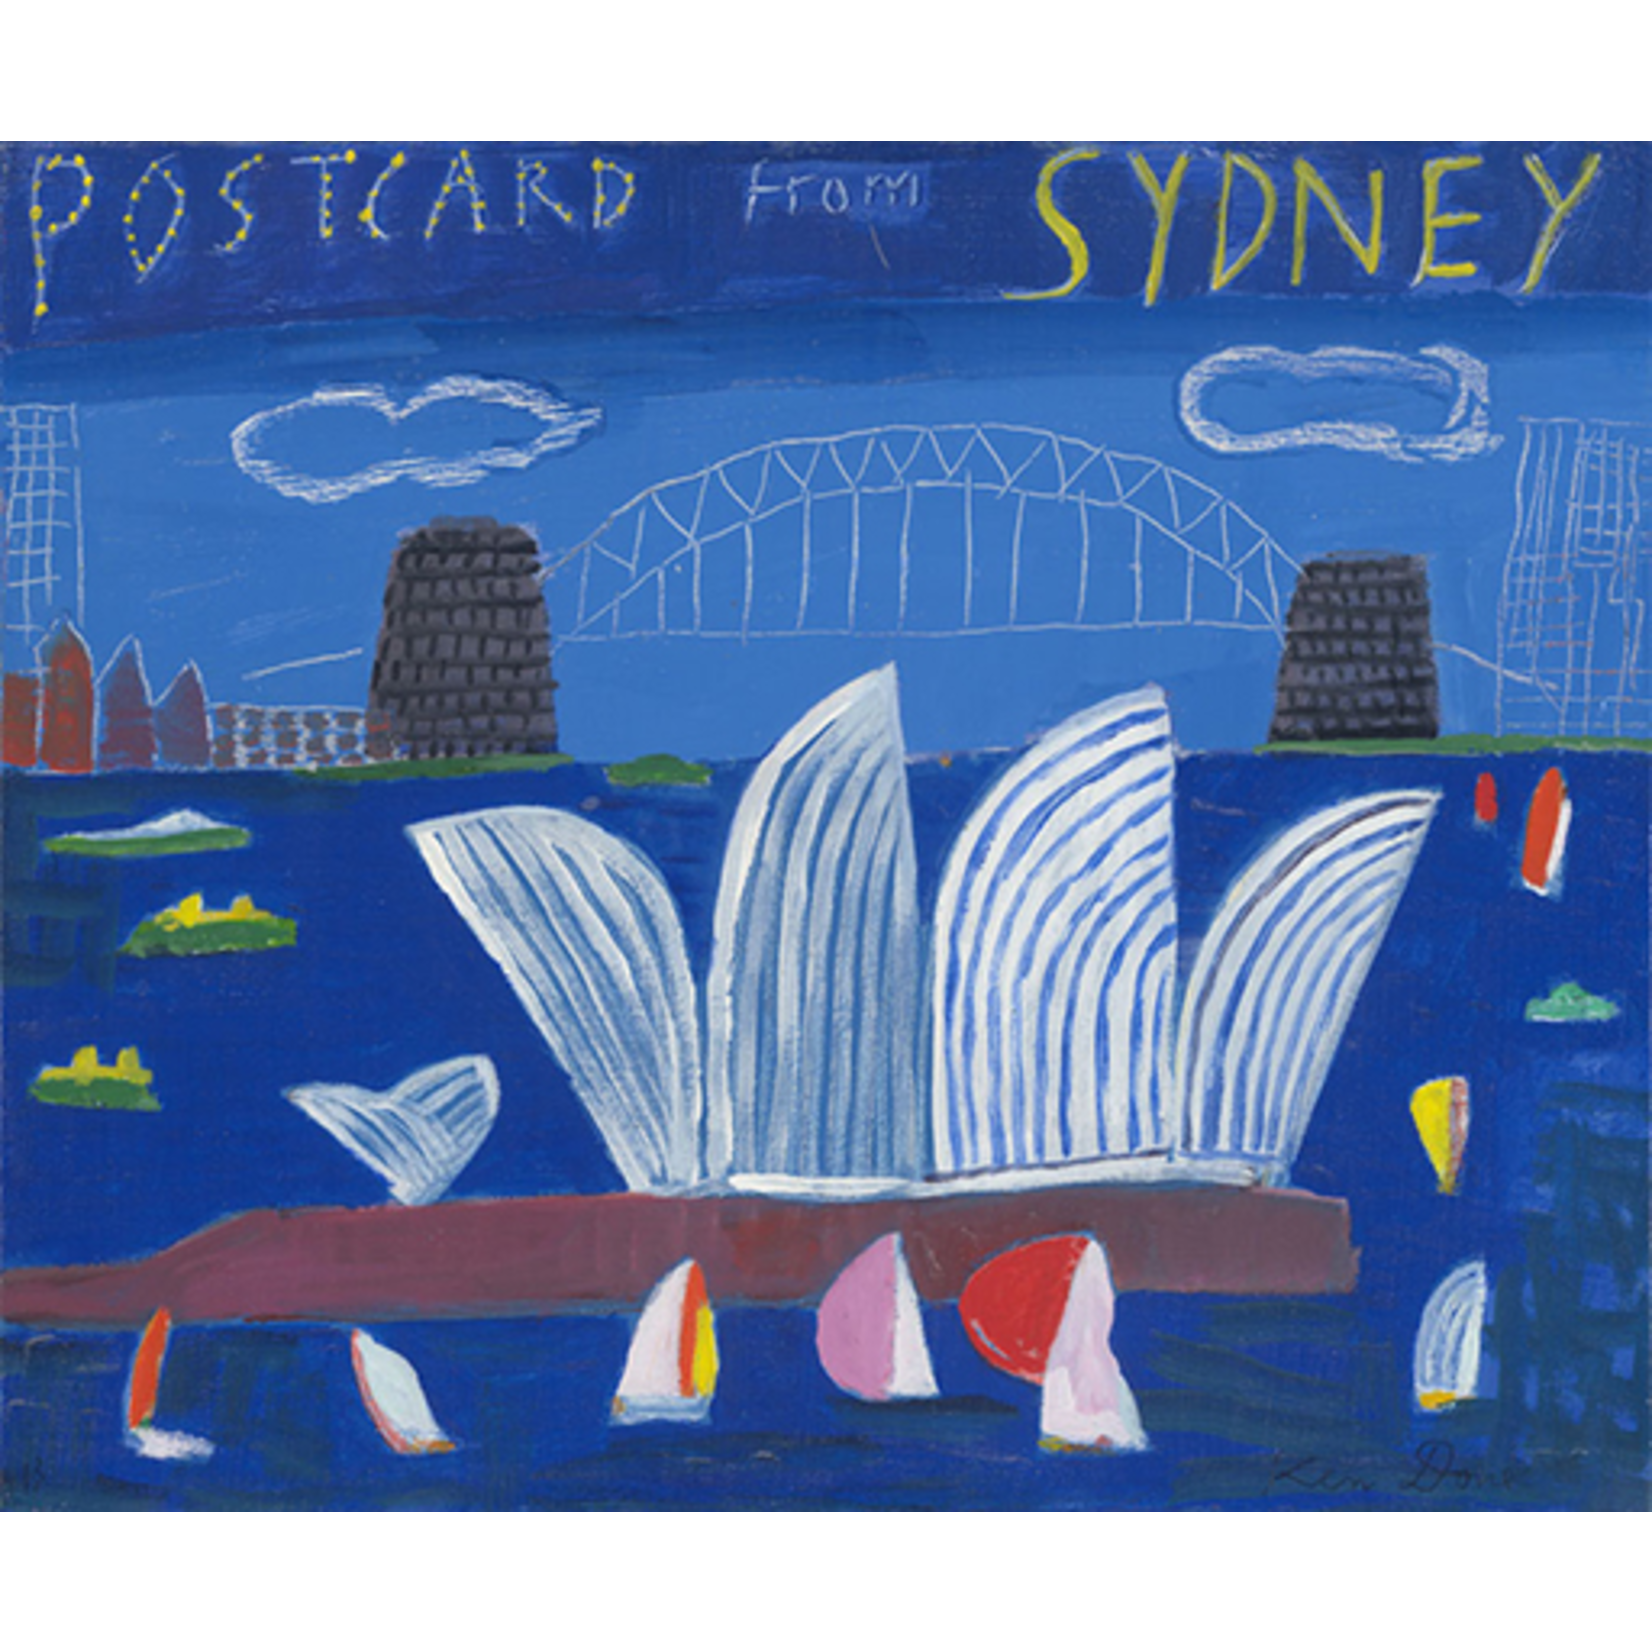 Limited Edition Prints Postcard from Sydney, 2013